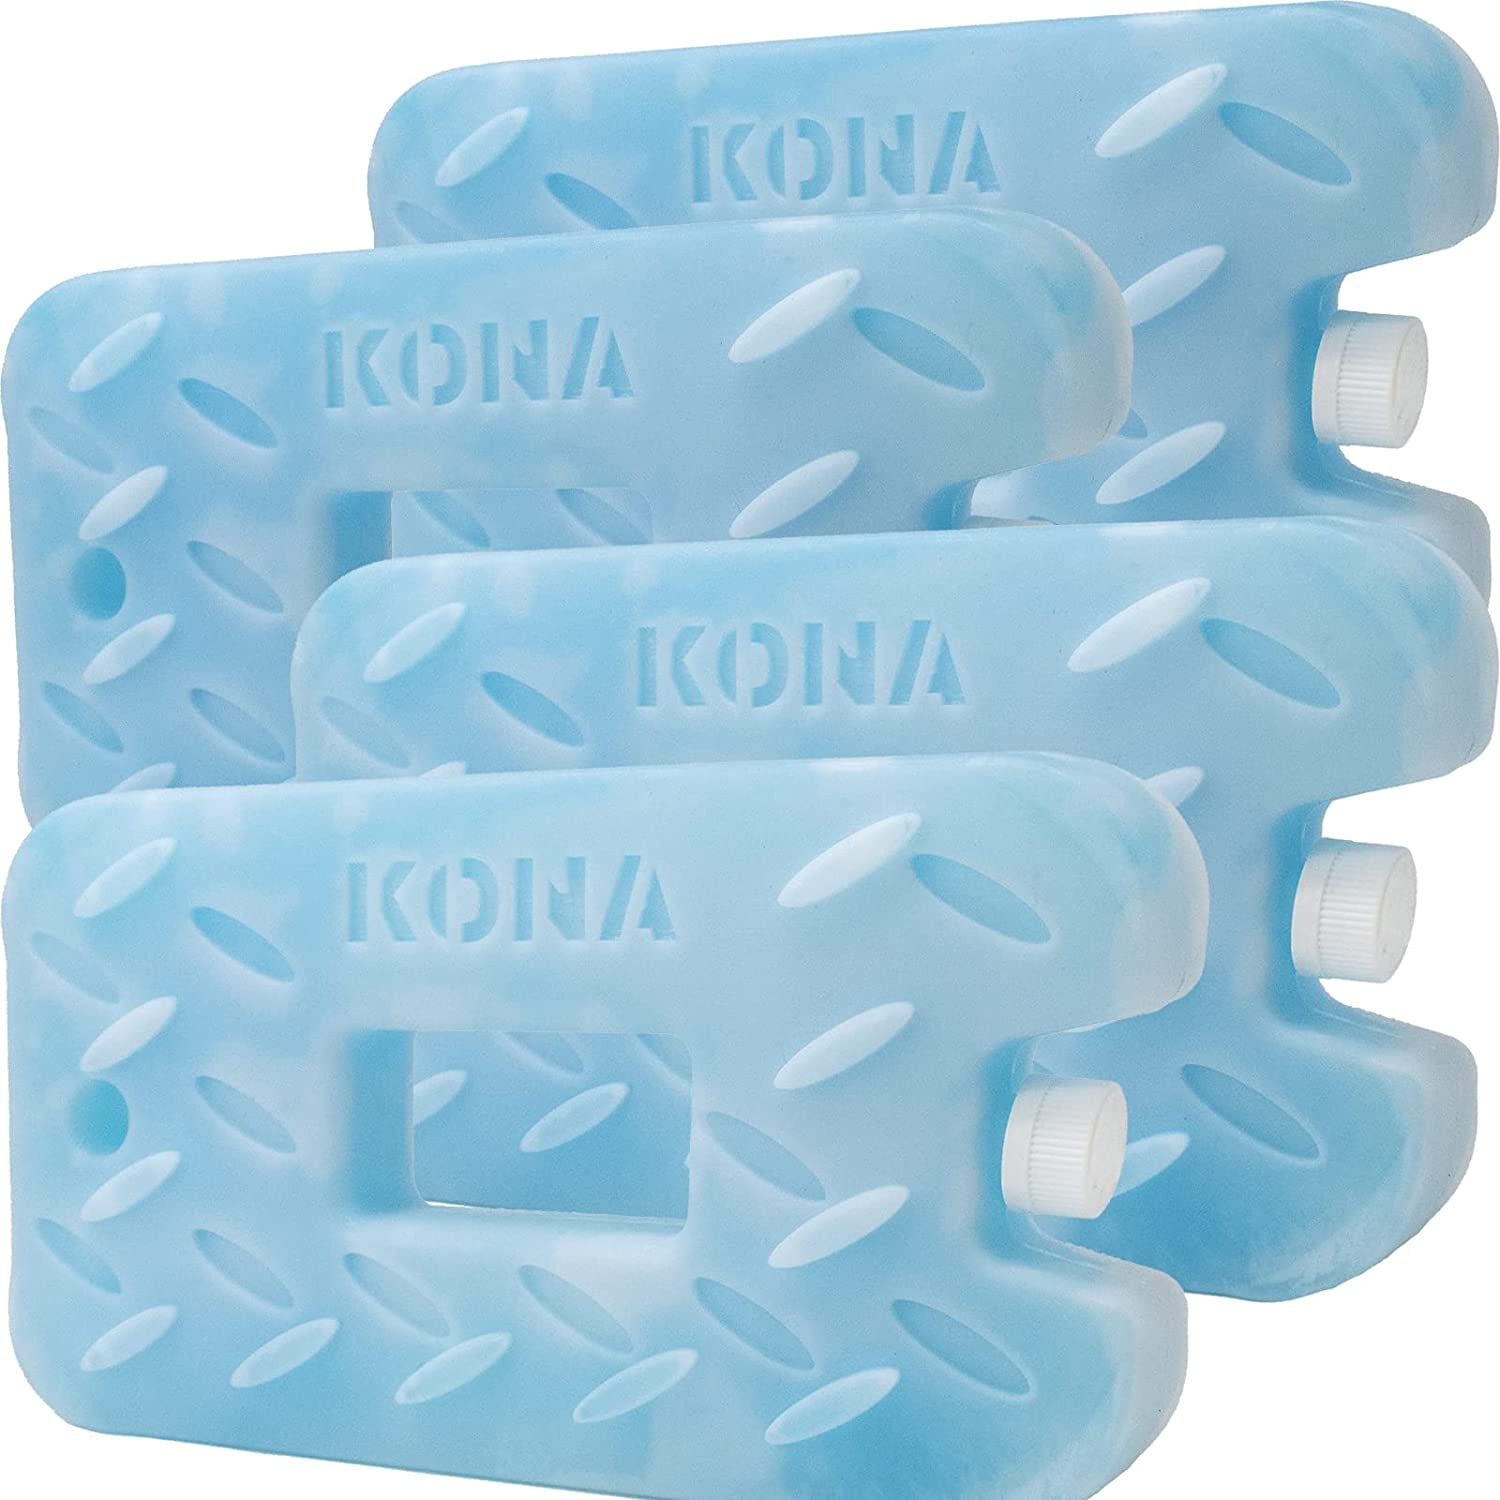 Kona XL 4 lb. Blue Ice Pack for Coolers - Extreme Long Lasting (-5C) G